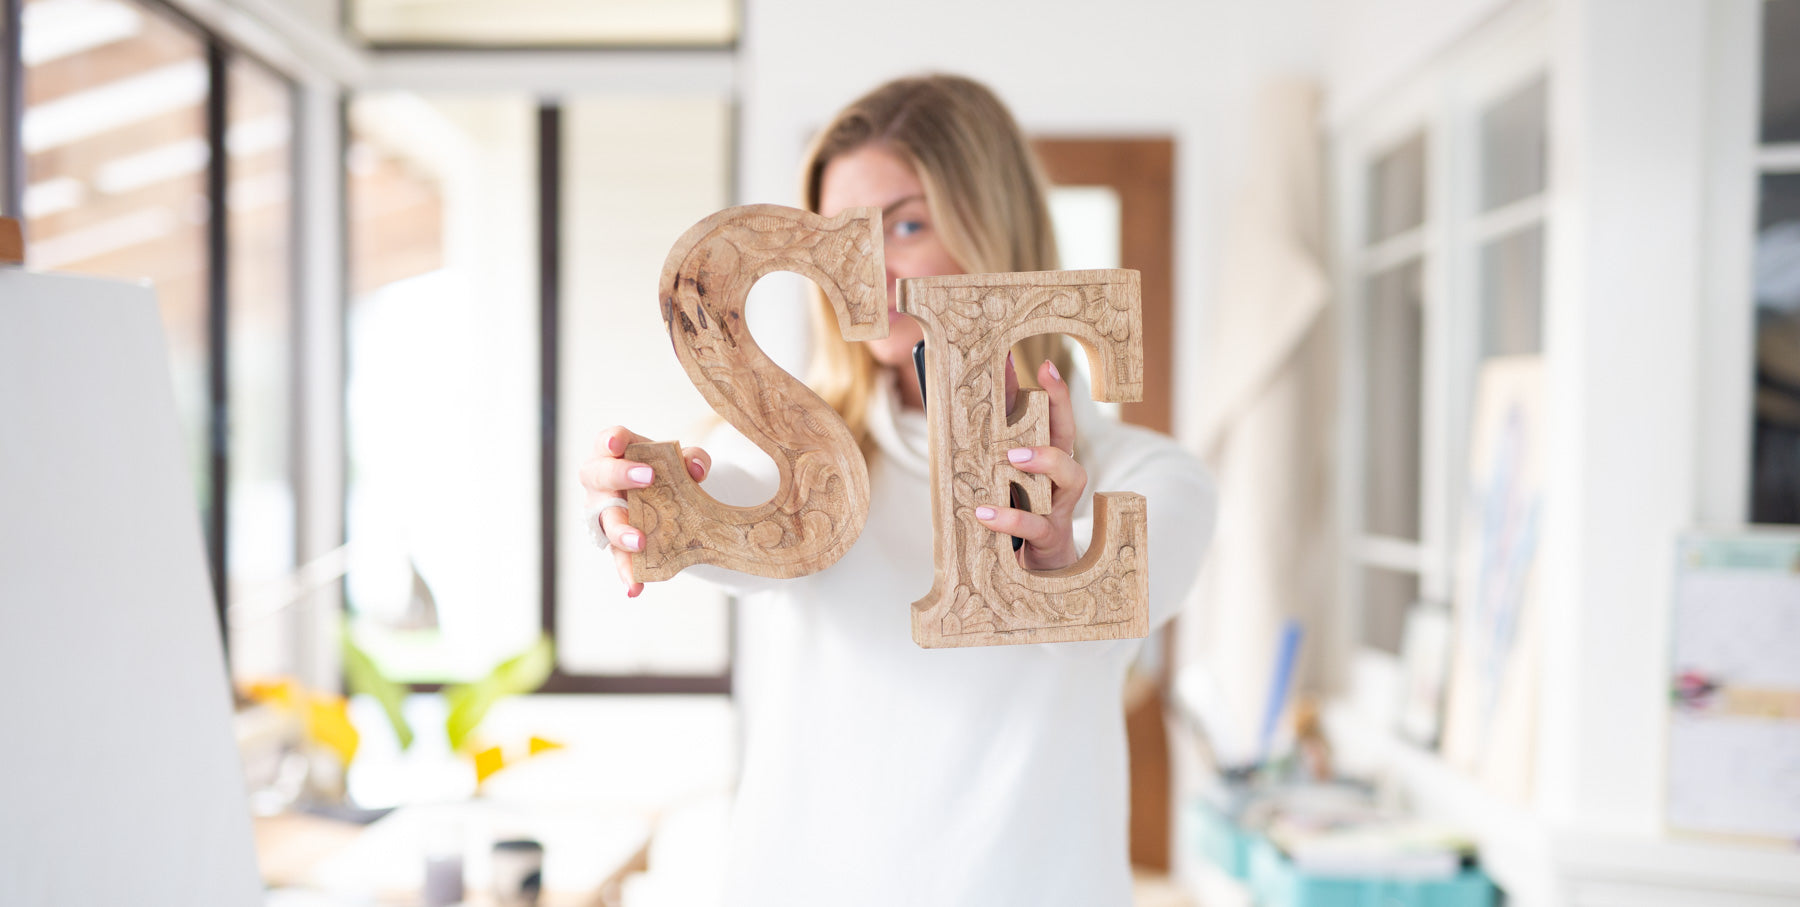 Stephanie Elizabeth holding letters S and E